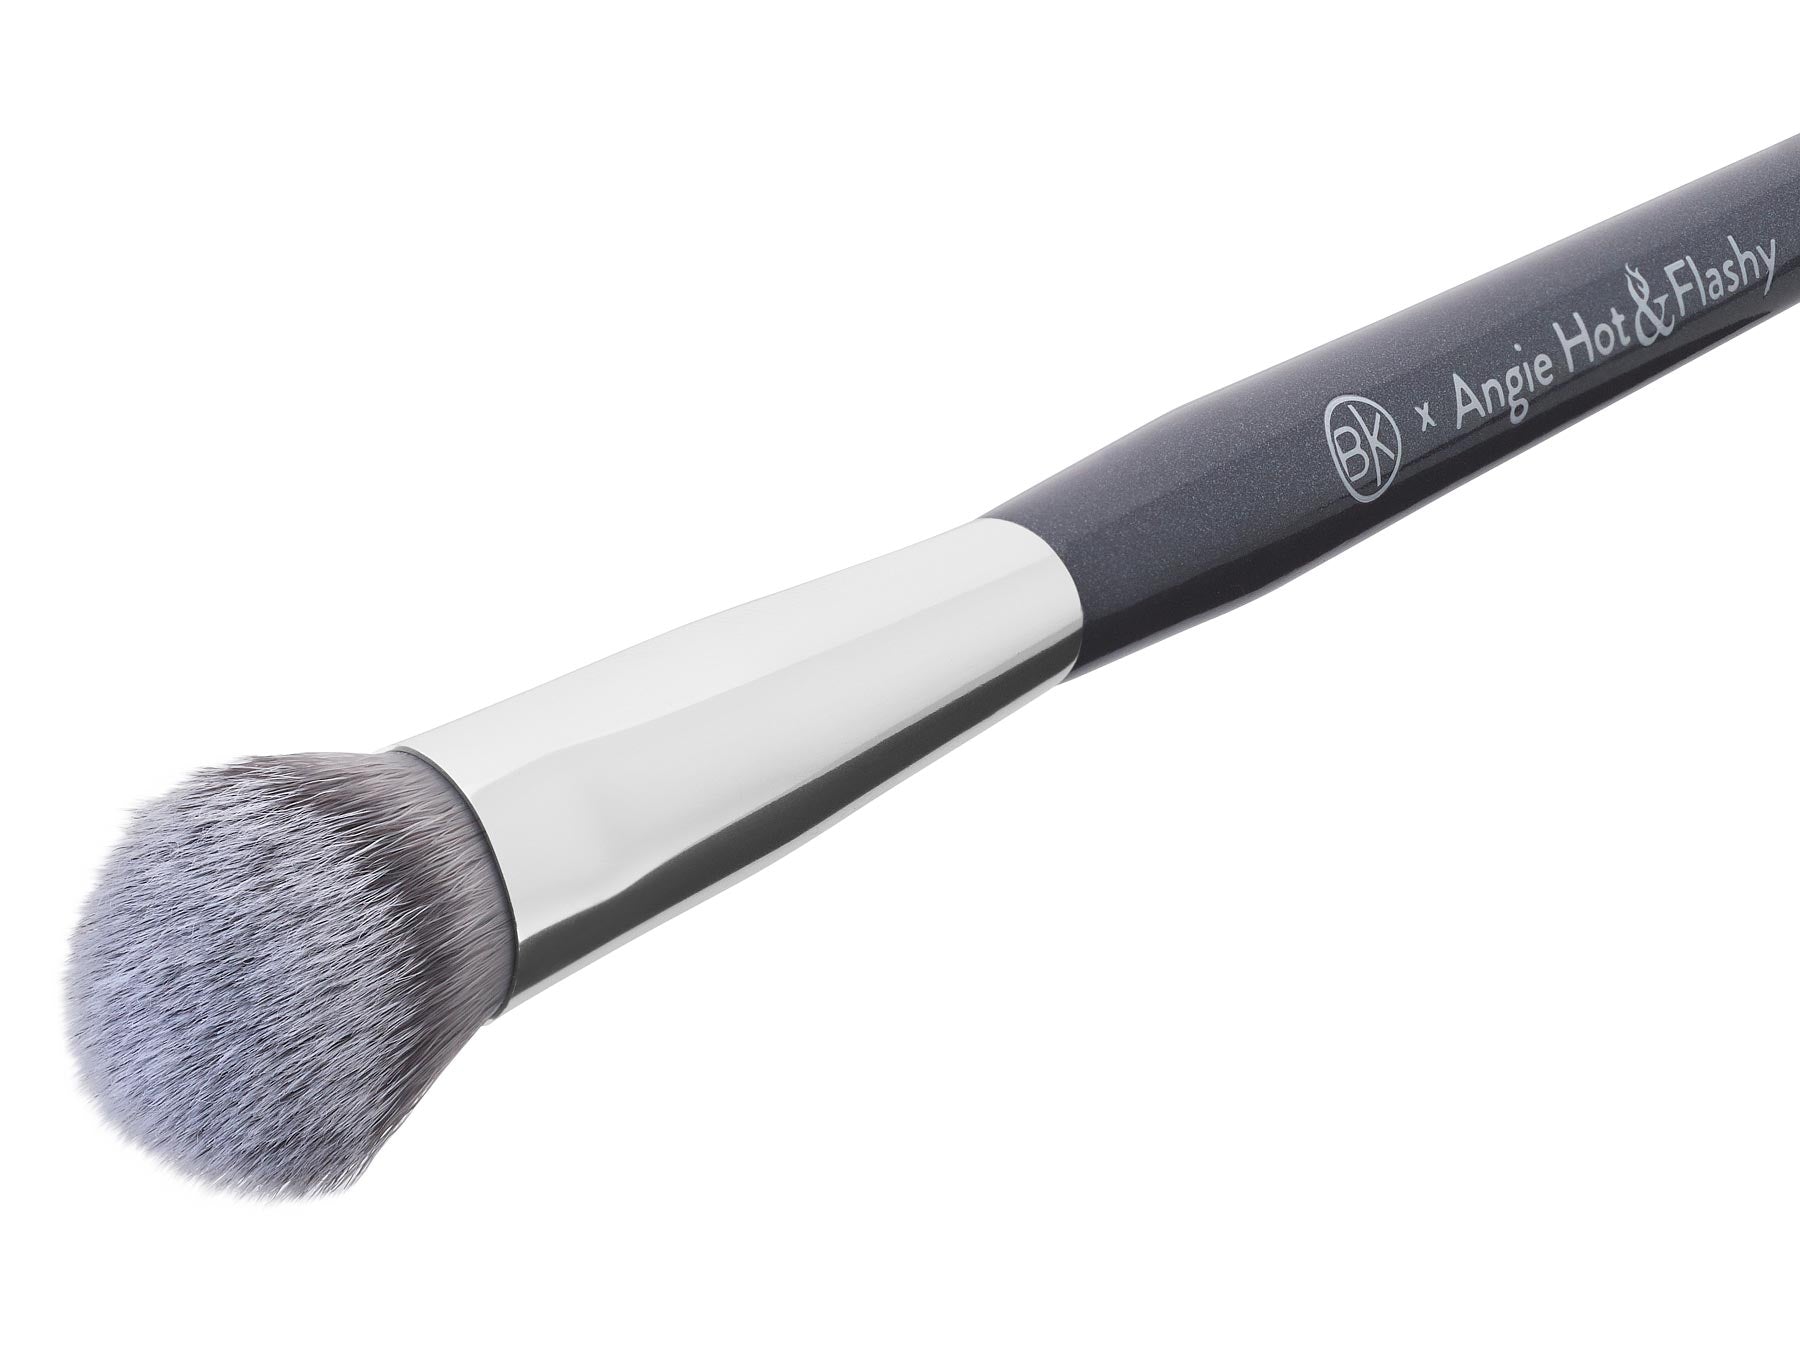 BK Beauty x Angie Hot & Flashy - A506 Concealer Brush